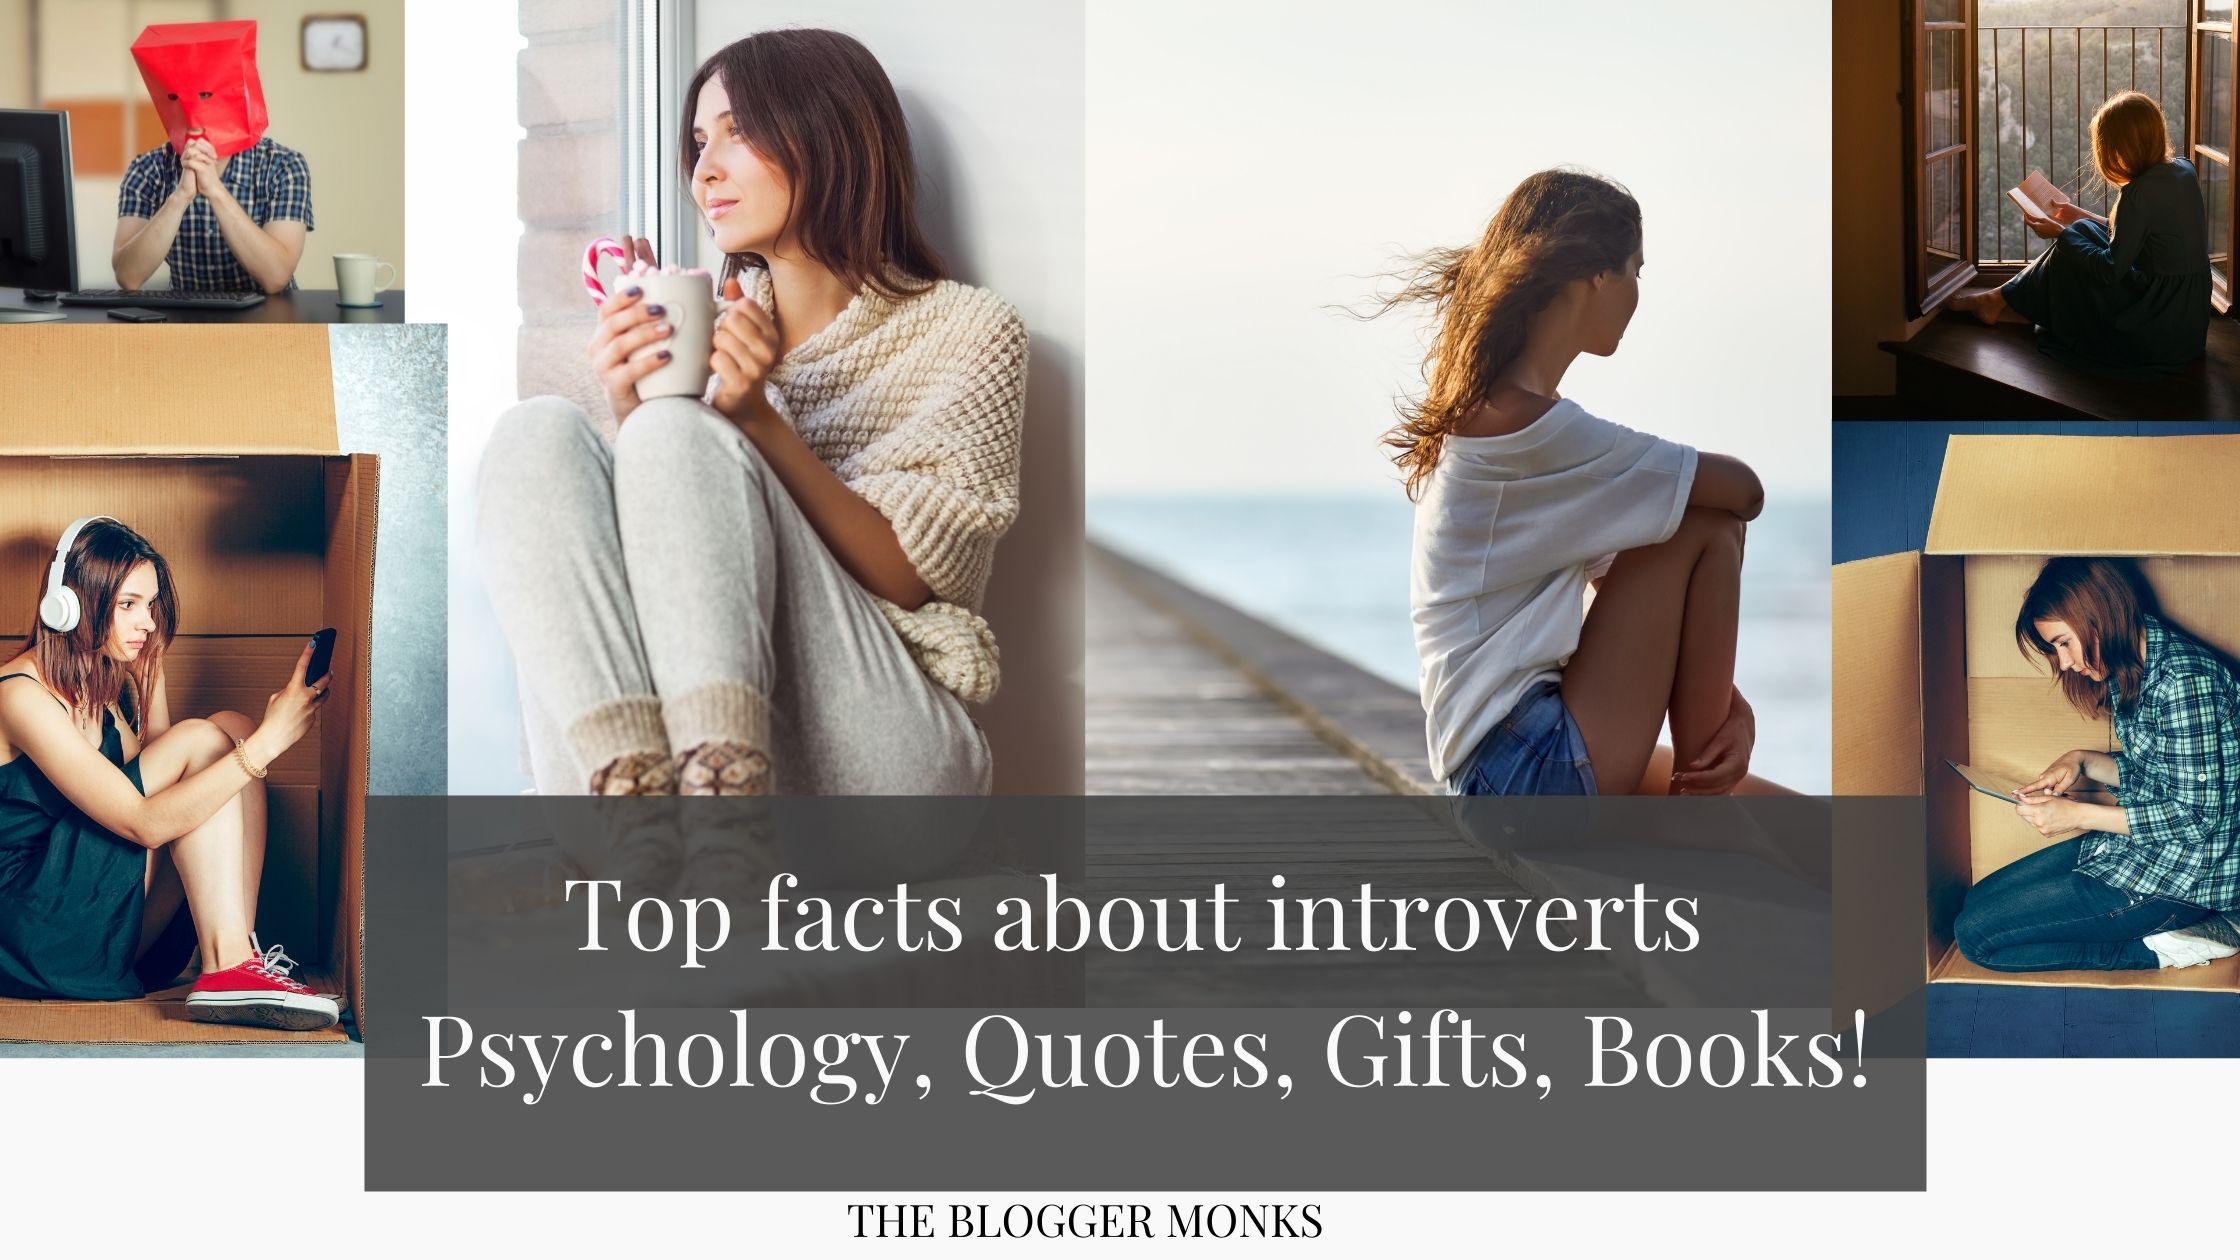 psychological facts books and gifts about introverts